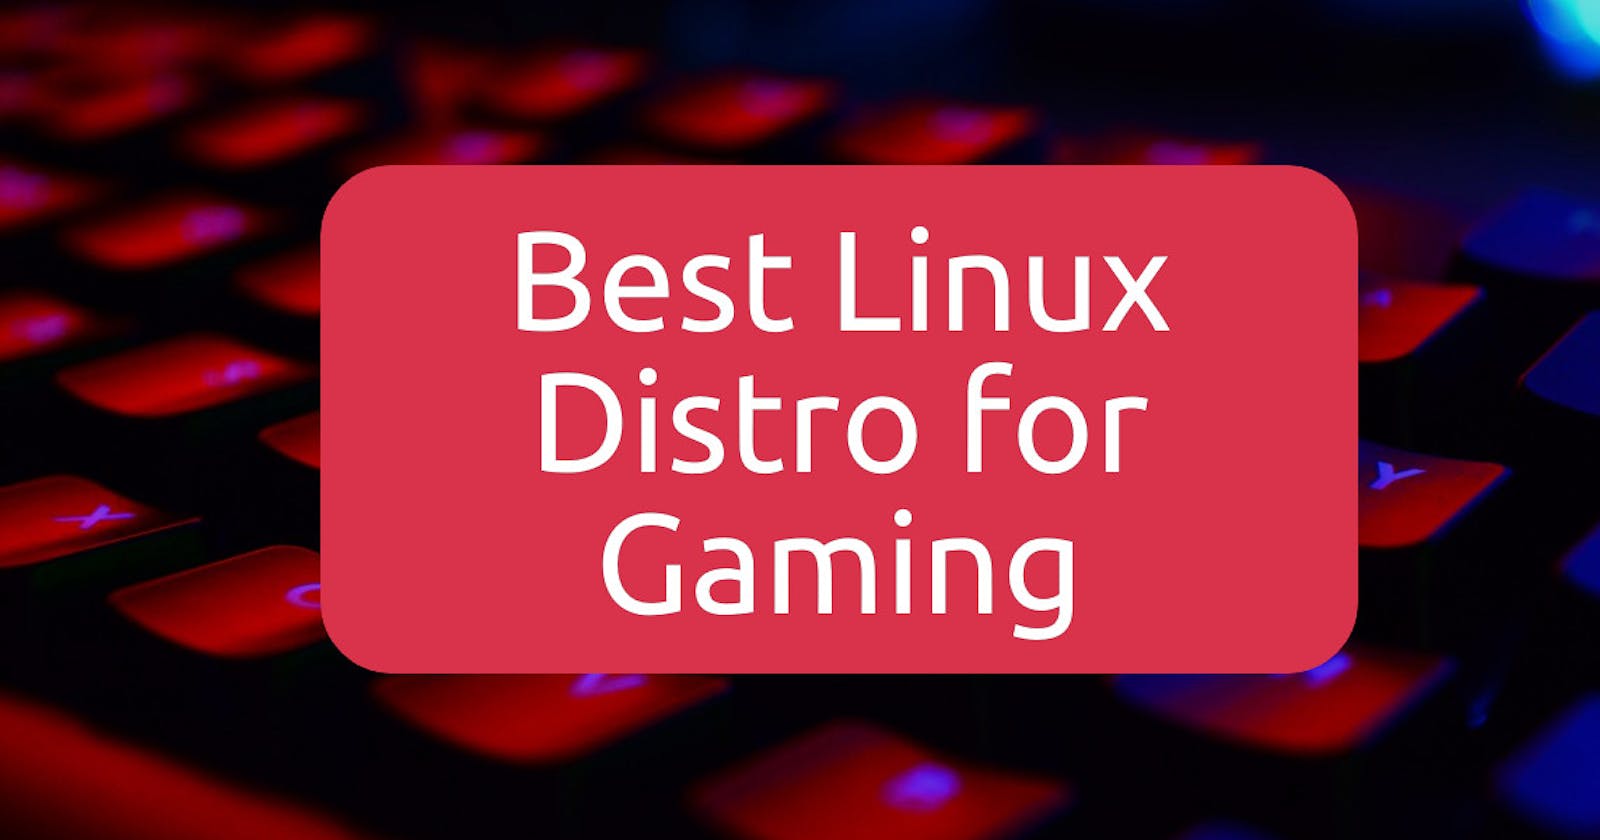 Best Linux Distros for Gaming in 2017